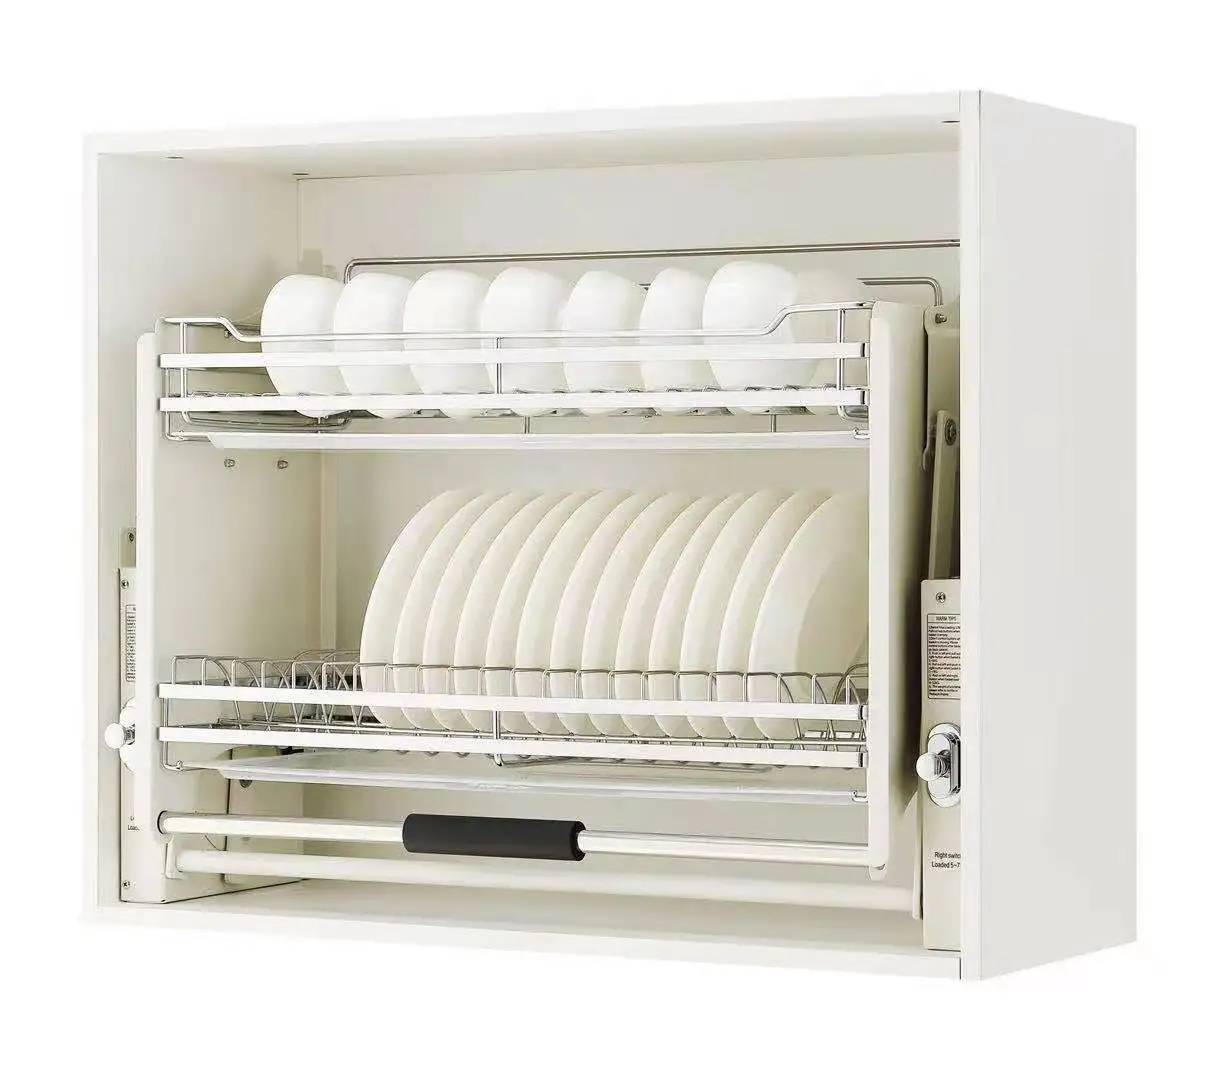 Kitchen Cabinet Stainless Steel Pull Out Storage Organizer Basket Collector Double Pull Down Basket